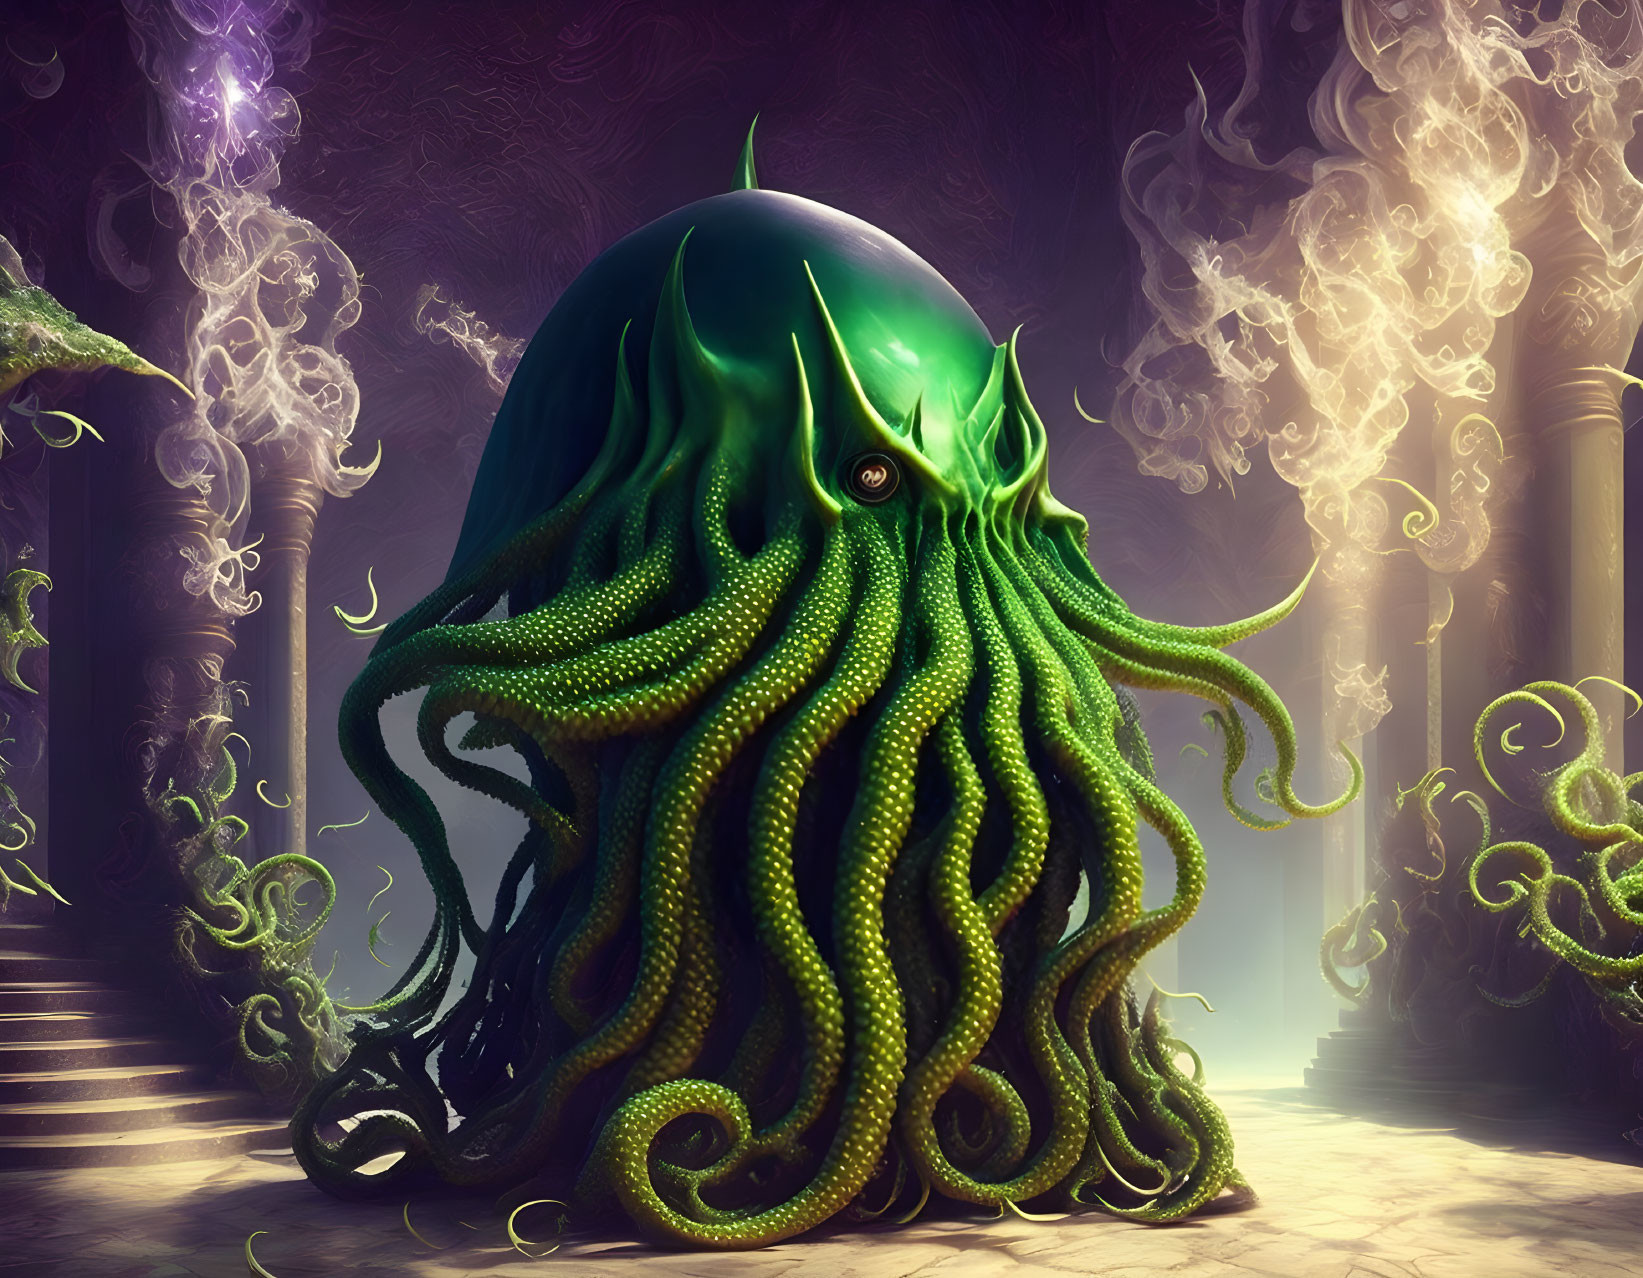 Mystical green octopus creature in purple chamber